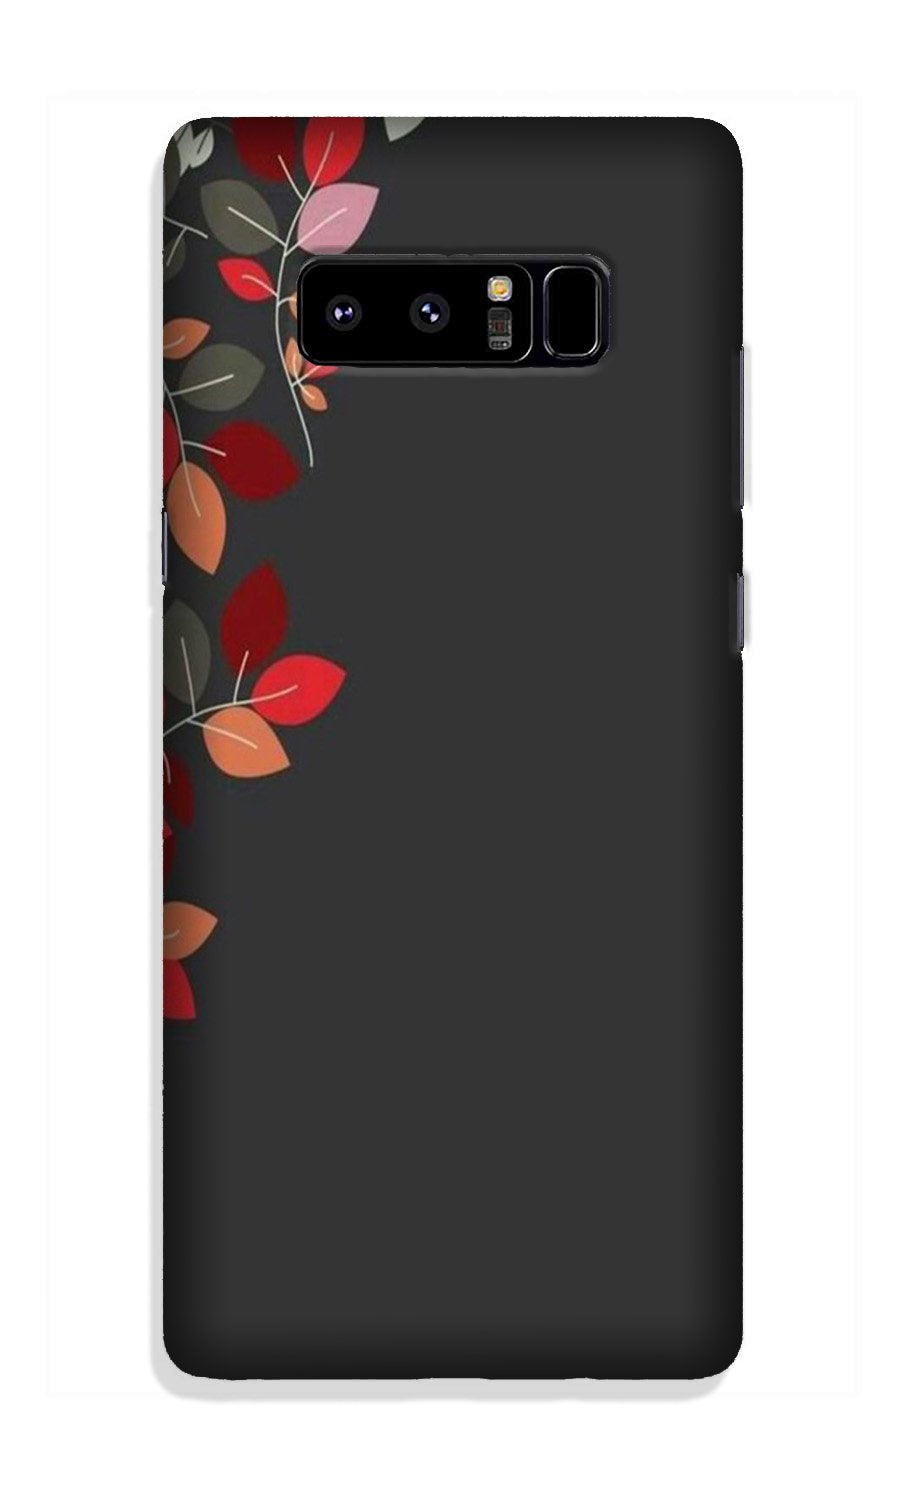 Grey Background Case for Galaxy Note 8